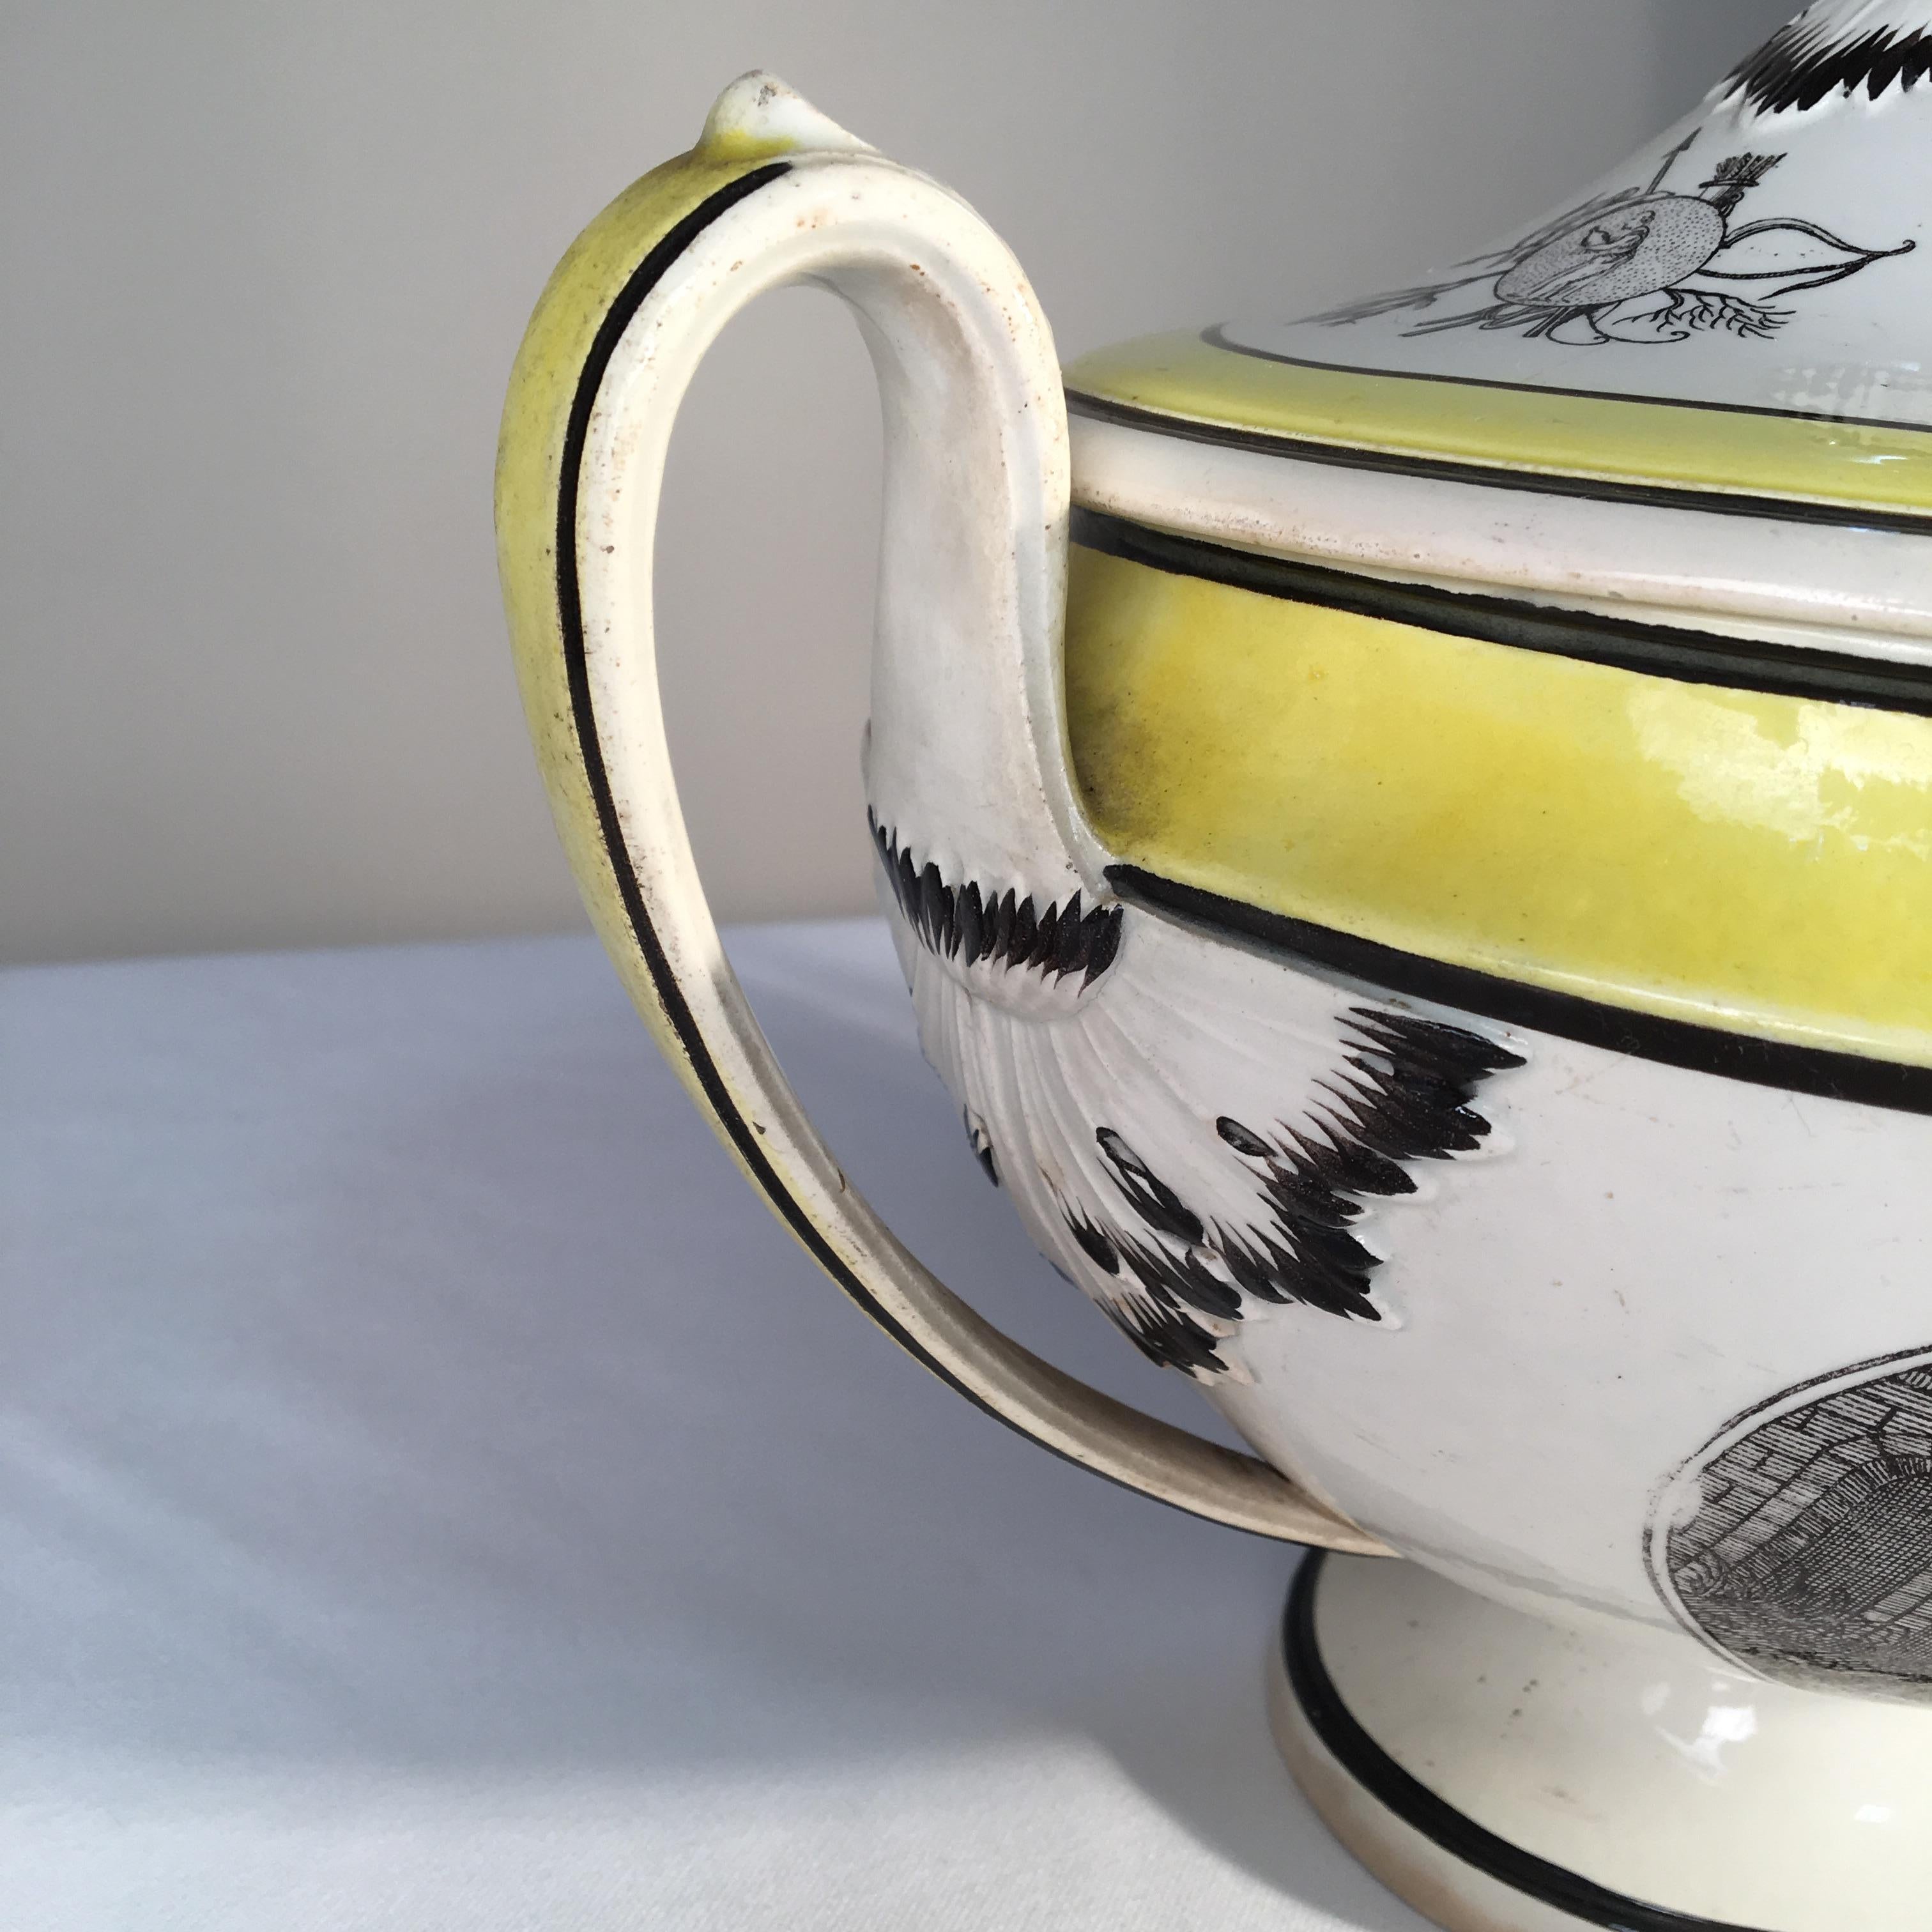 An early 19th century French Empire soup tureen signed Choisy, circa 1810, footed-urn shaped with looping handles and retaining its original lid with finial. The tureen has transfer decoration depicting military figures in a landscape and has yellow